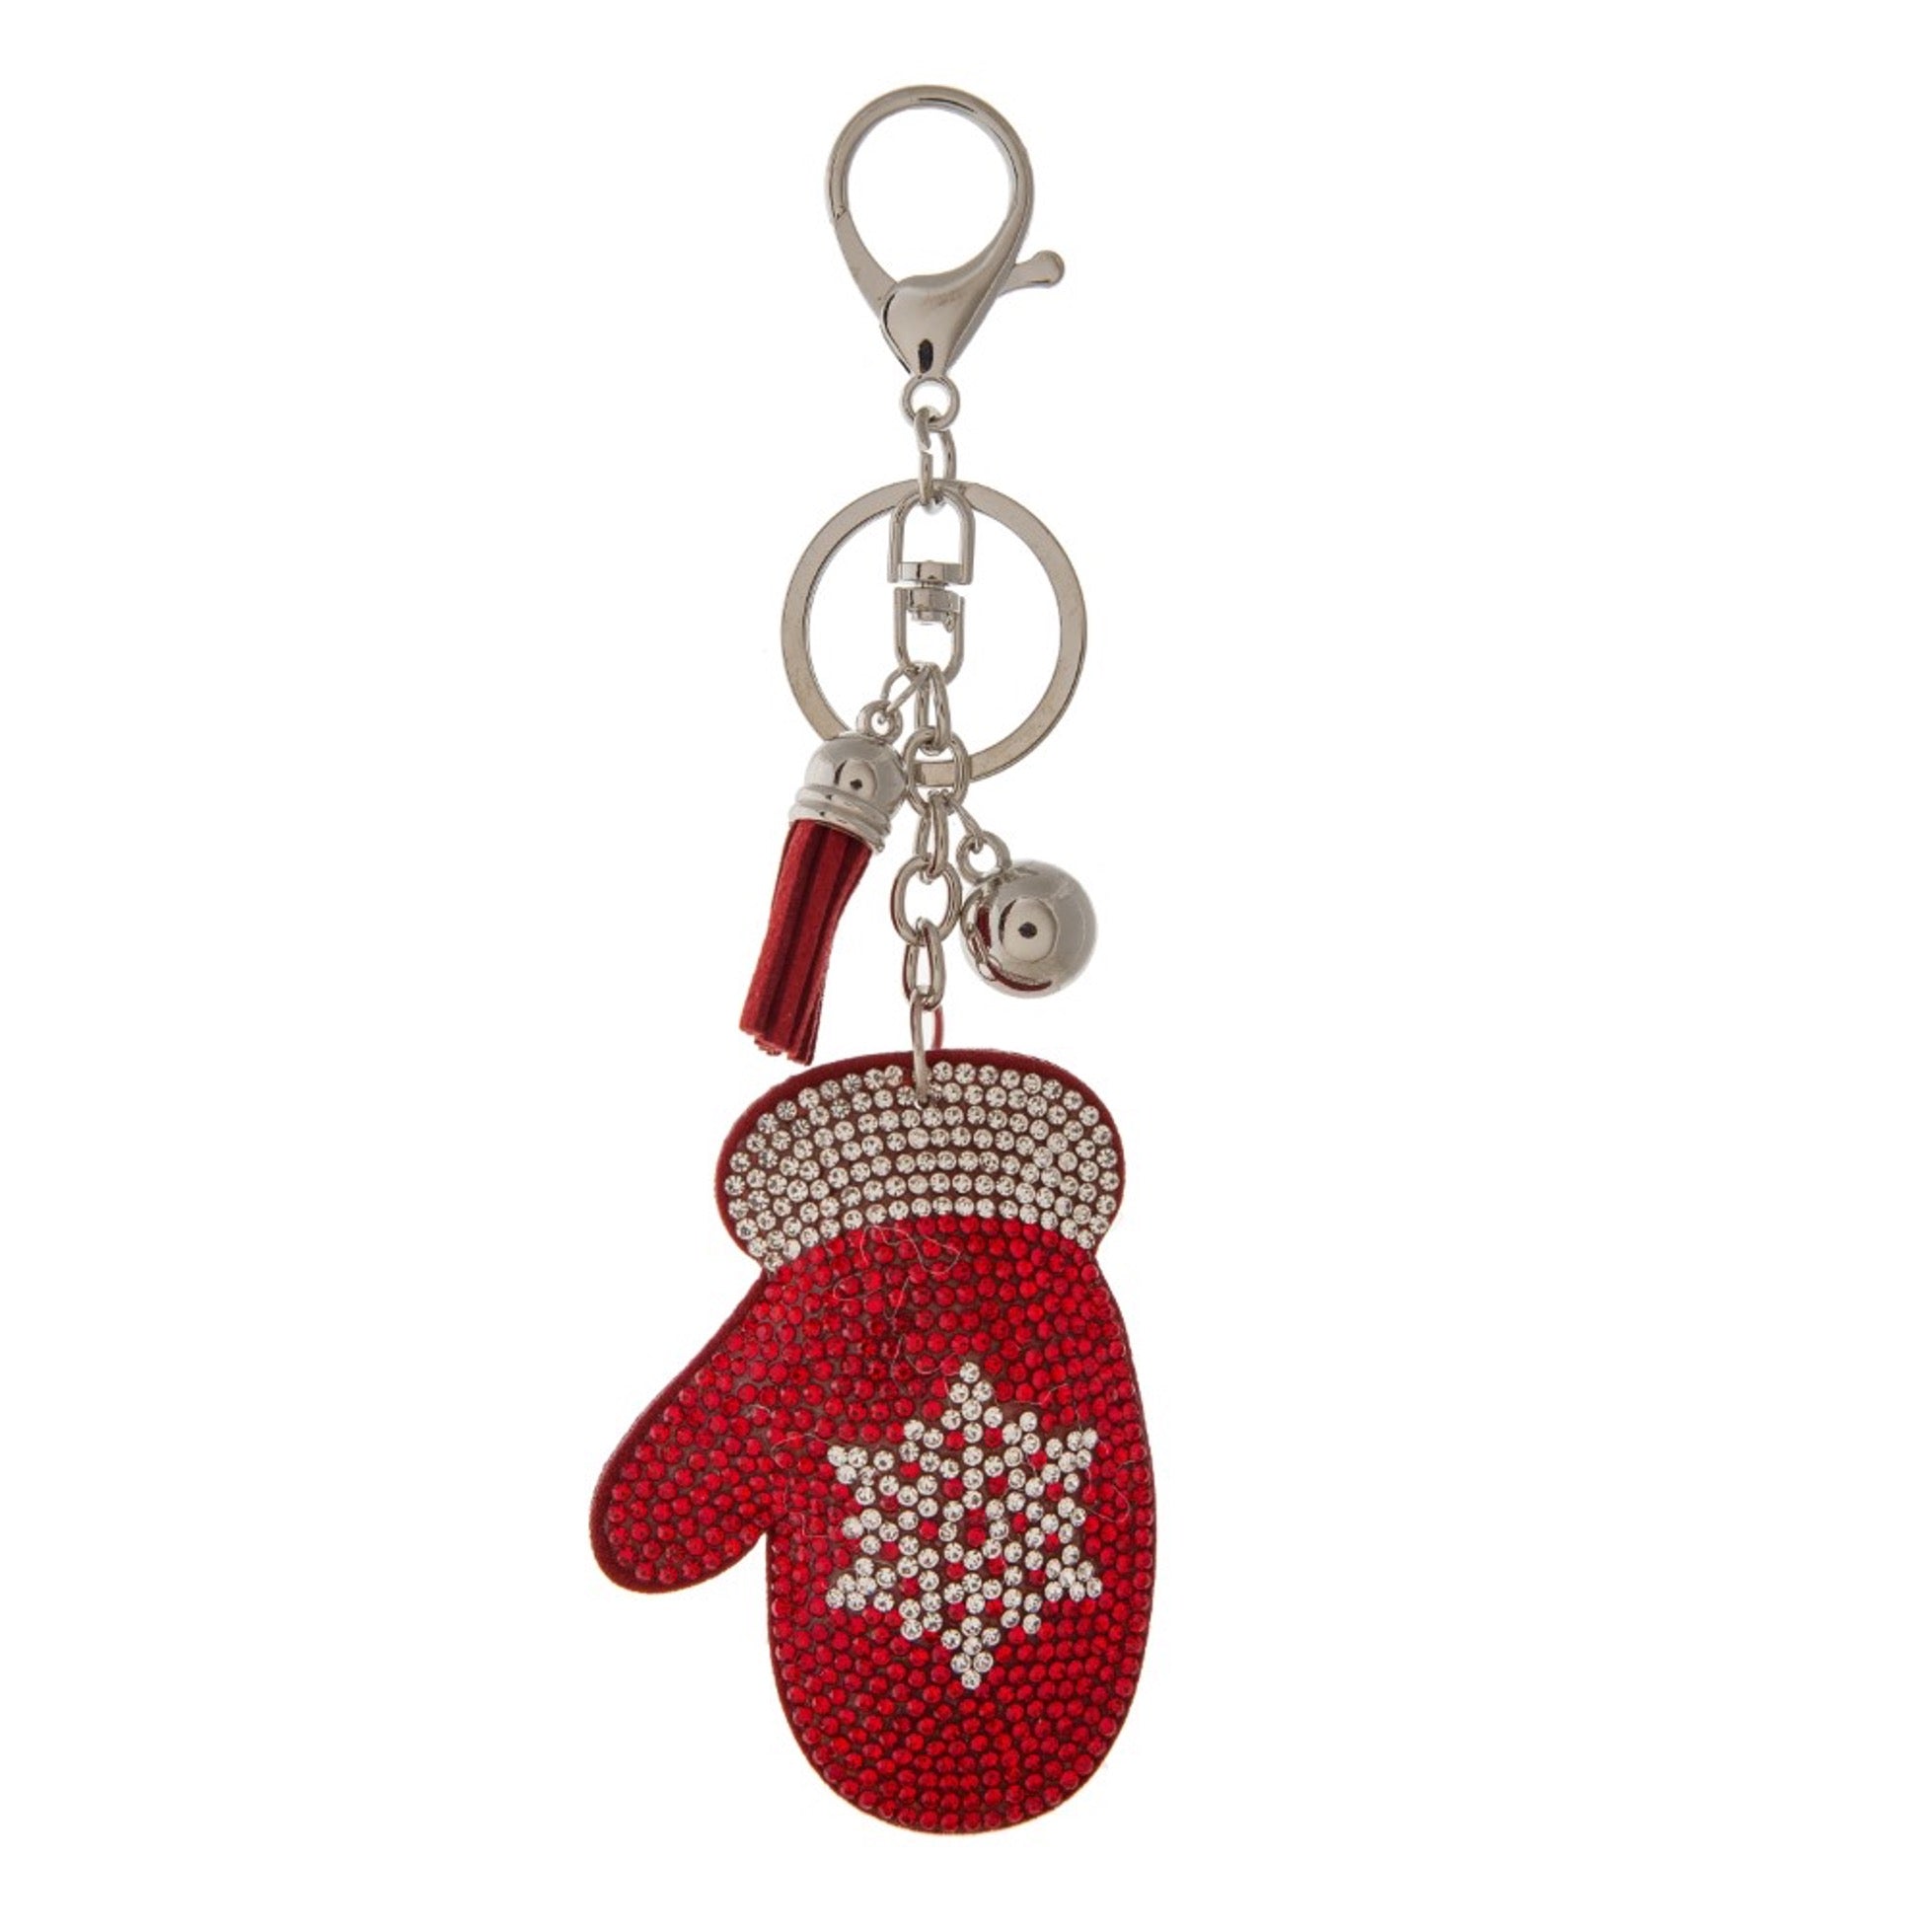 Studded Rhinestone Plush Keychain with Mitten Design - Cowtown Bling N Things